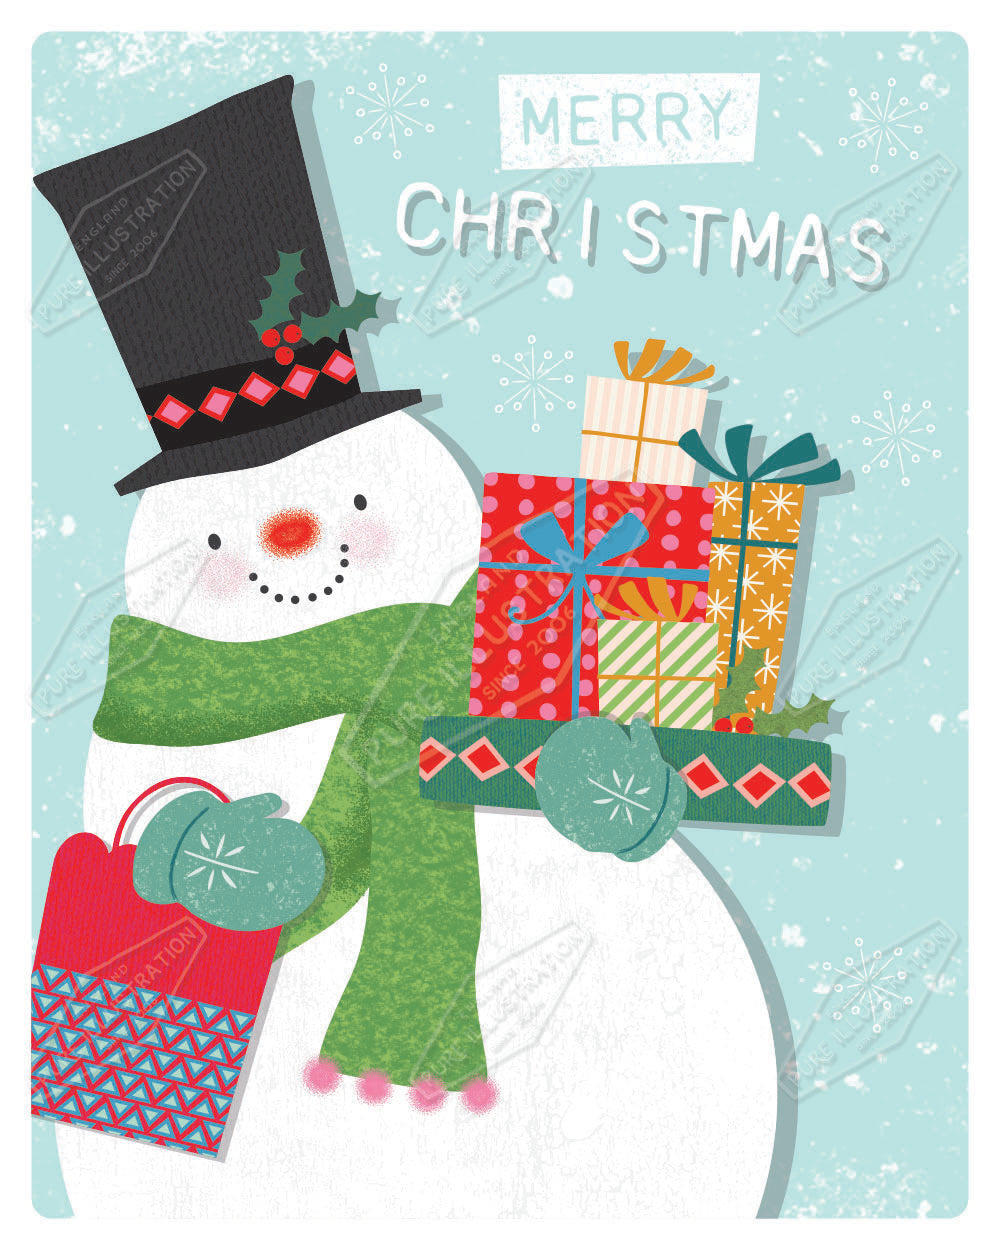 Snowman and Gifts Christmas Design by Gill Eggleston for Pure Art Licensing Agency & Surface Design Studio